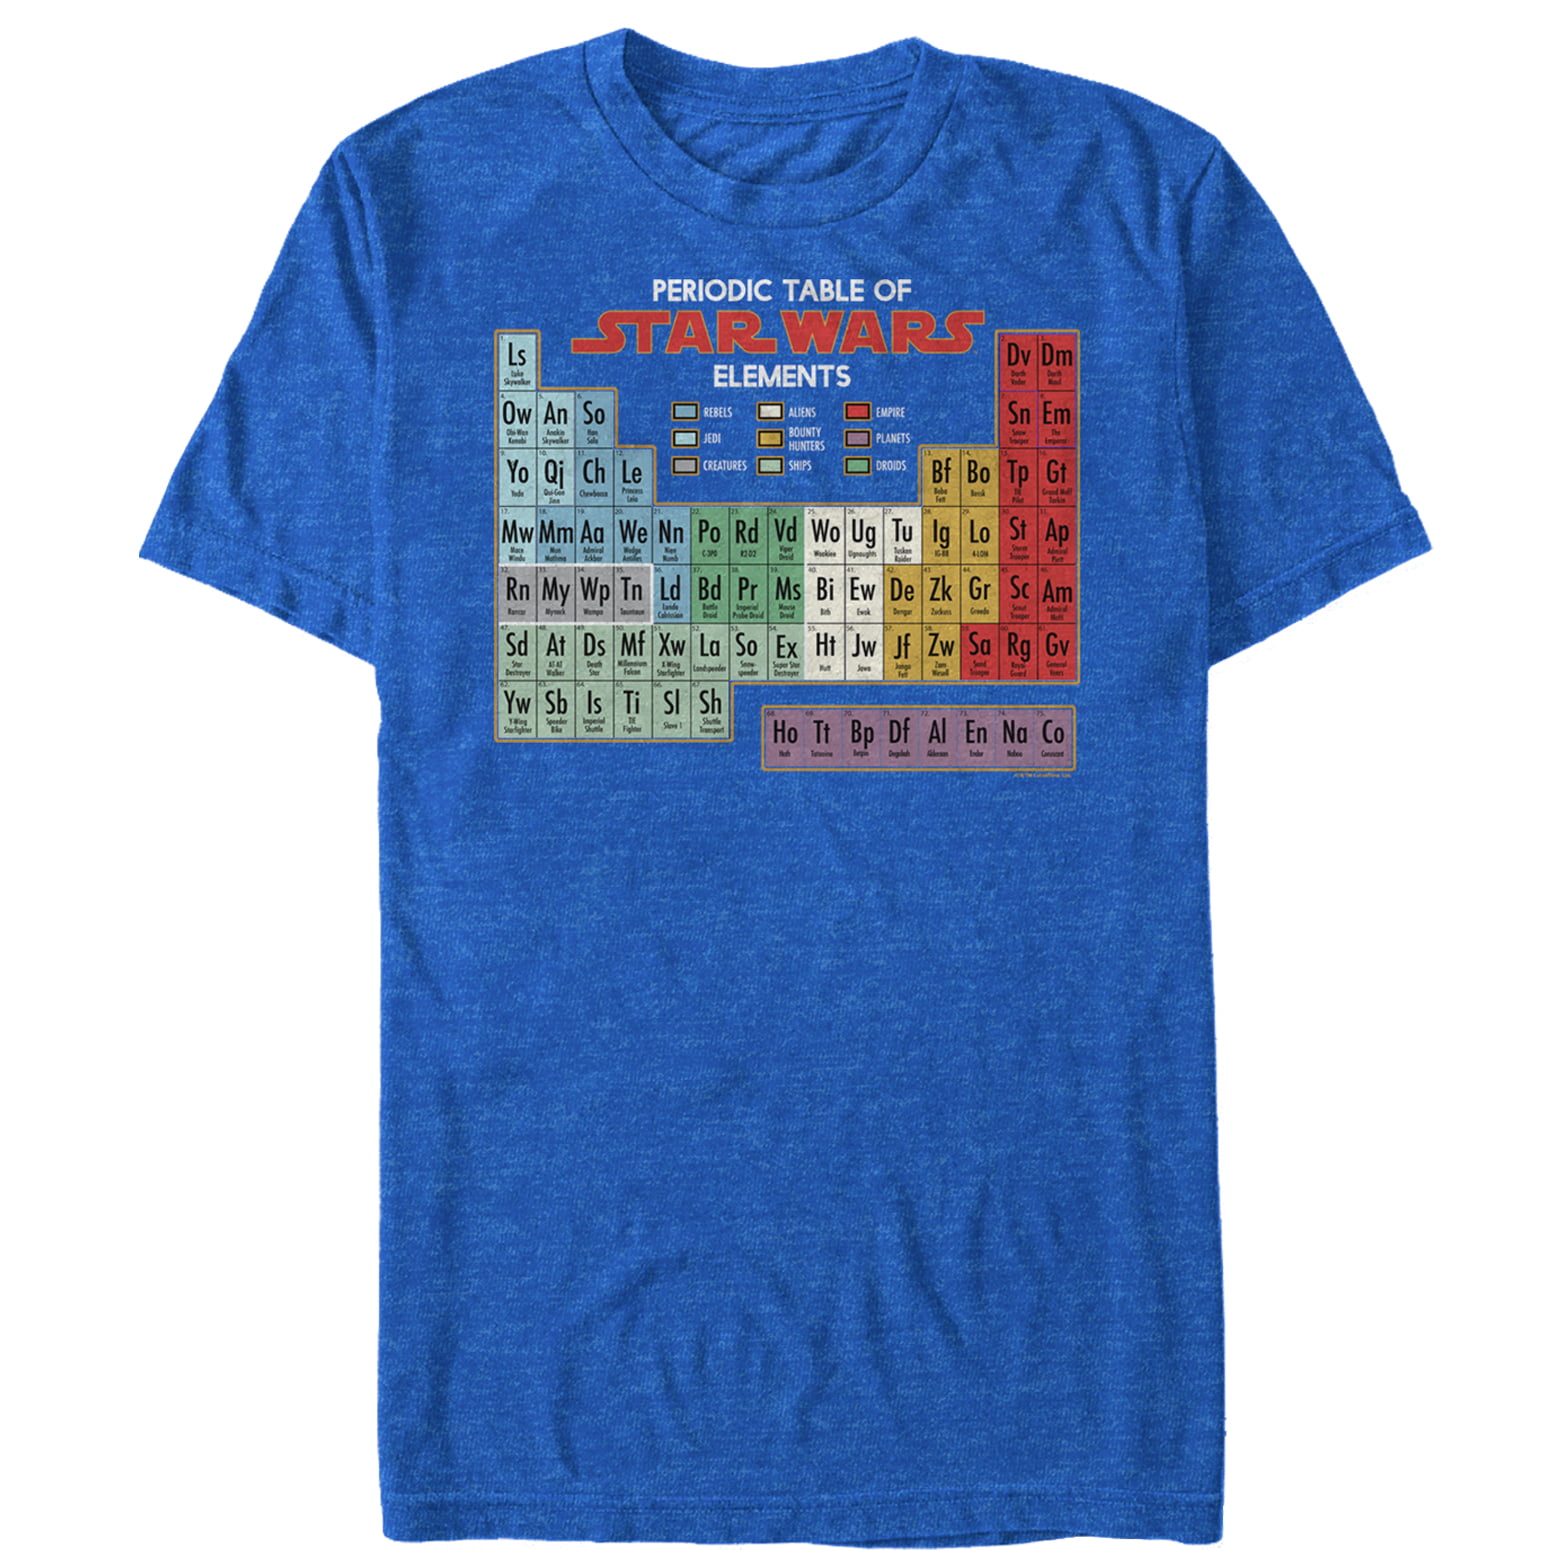 Star Wars - Star Wars Men's Periodic Table of Elements T-Shirt ...